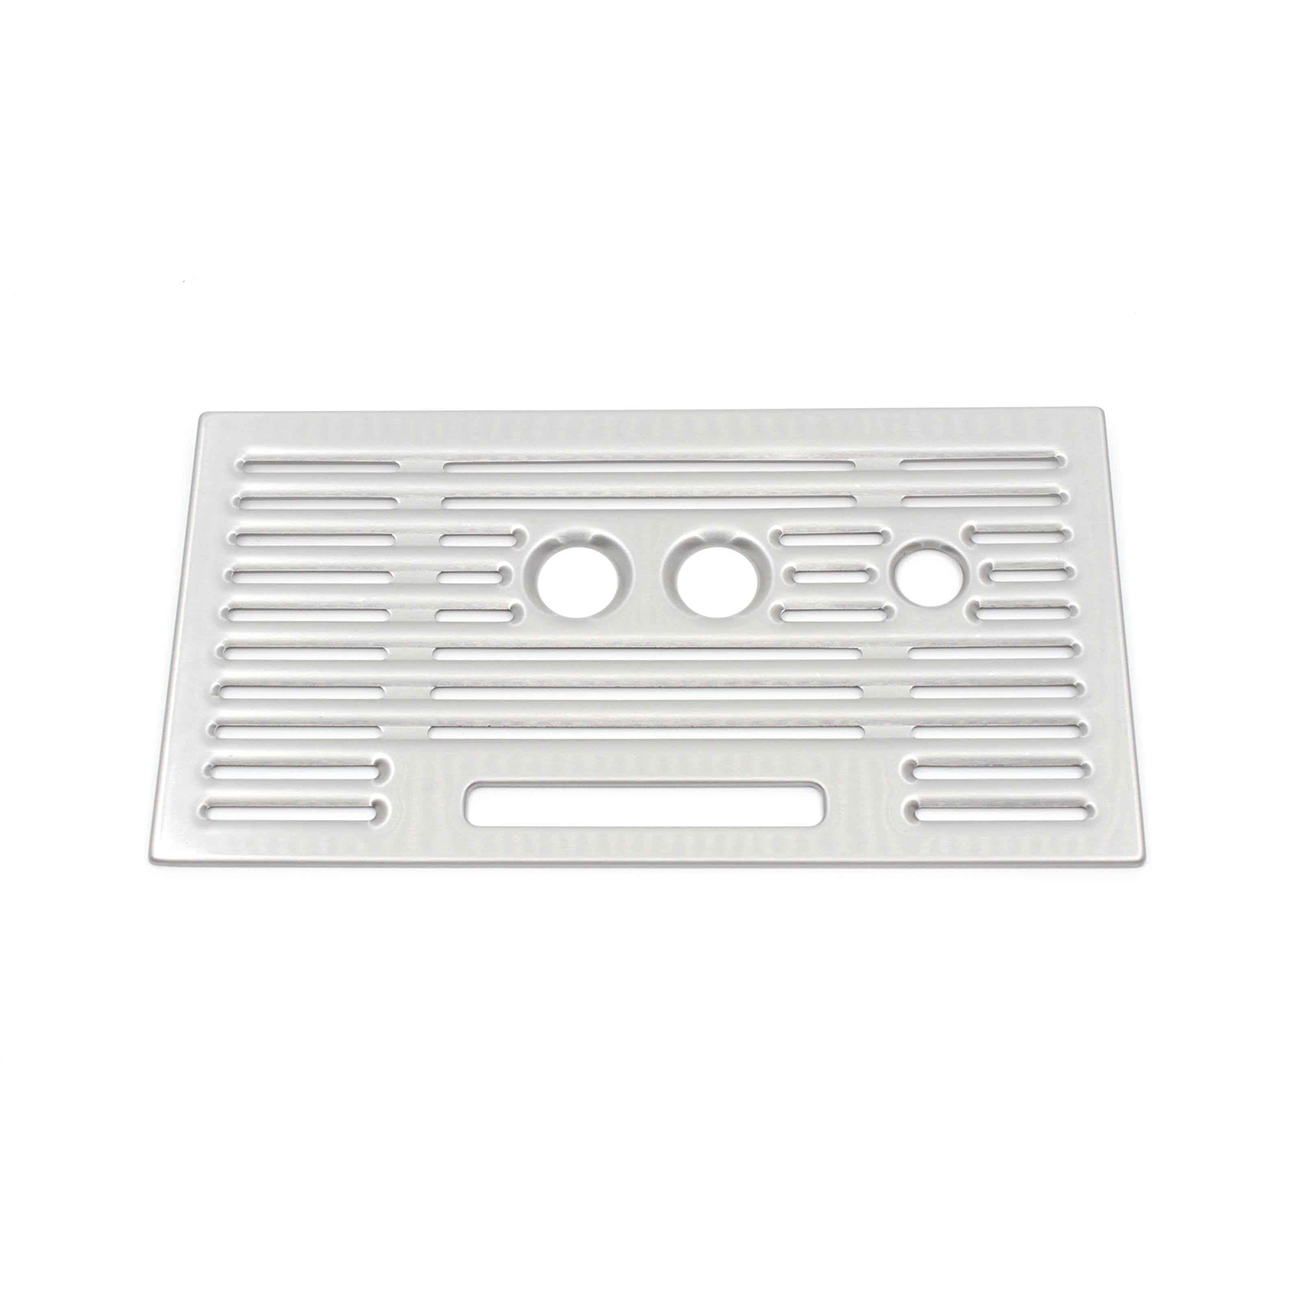 Grill Drip Tray for selected Sage Espresso Machines.